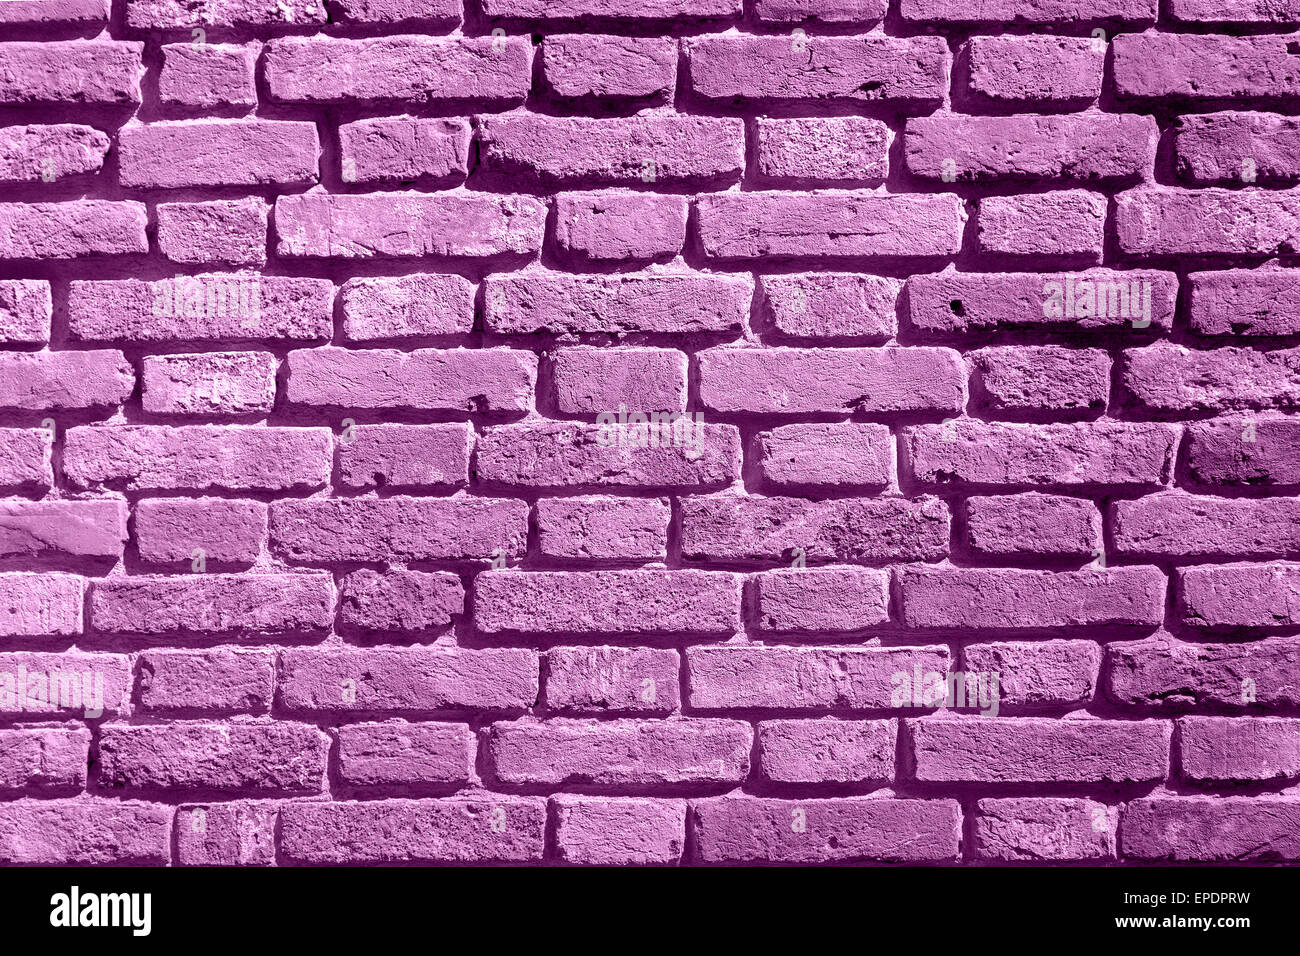 Background of purple brick wall pattern texture. Suitable for graffiti inscriptions as a textured effect on behind Stock Photo